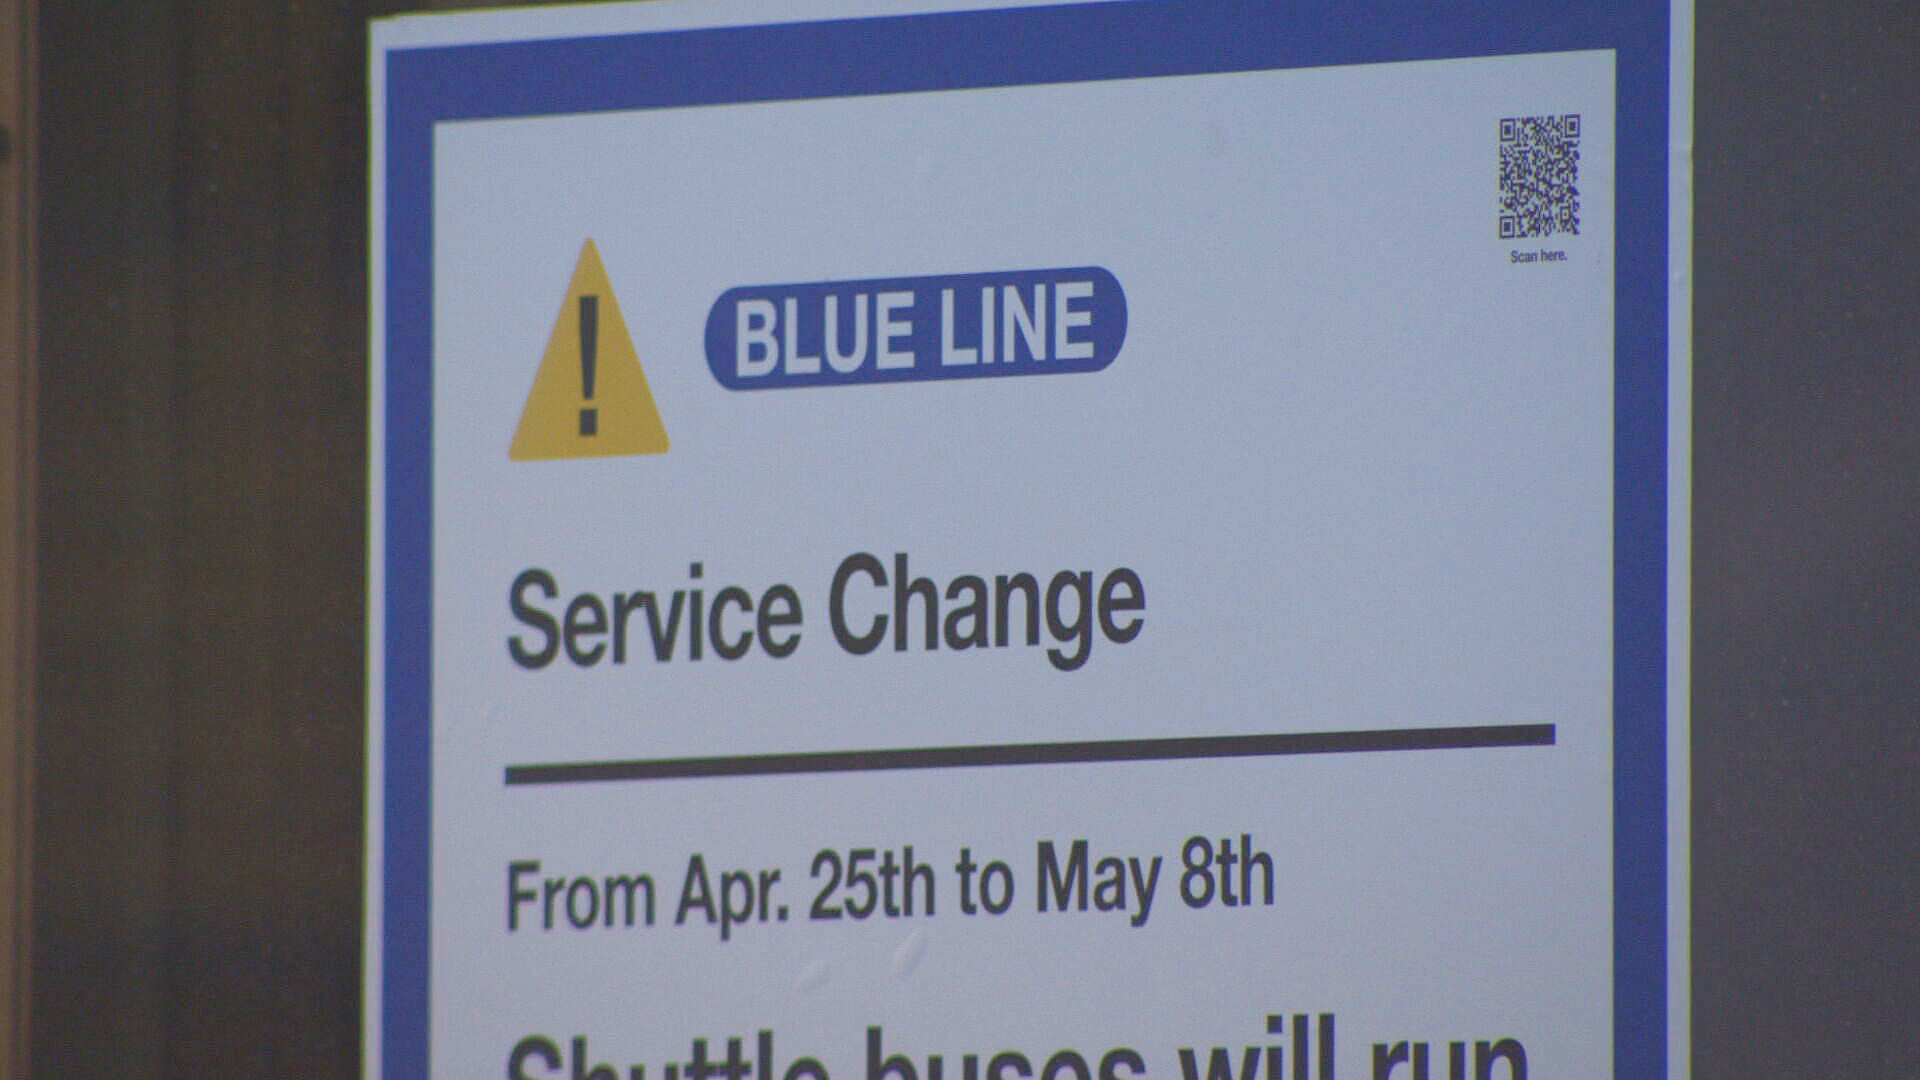 Shuttle, Ferry Service To Replace Part Of MBTA Blue Line During Construction